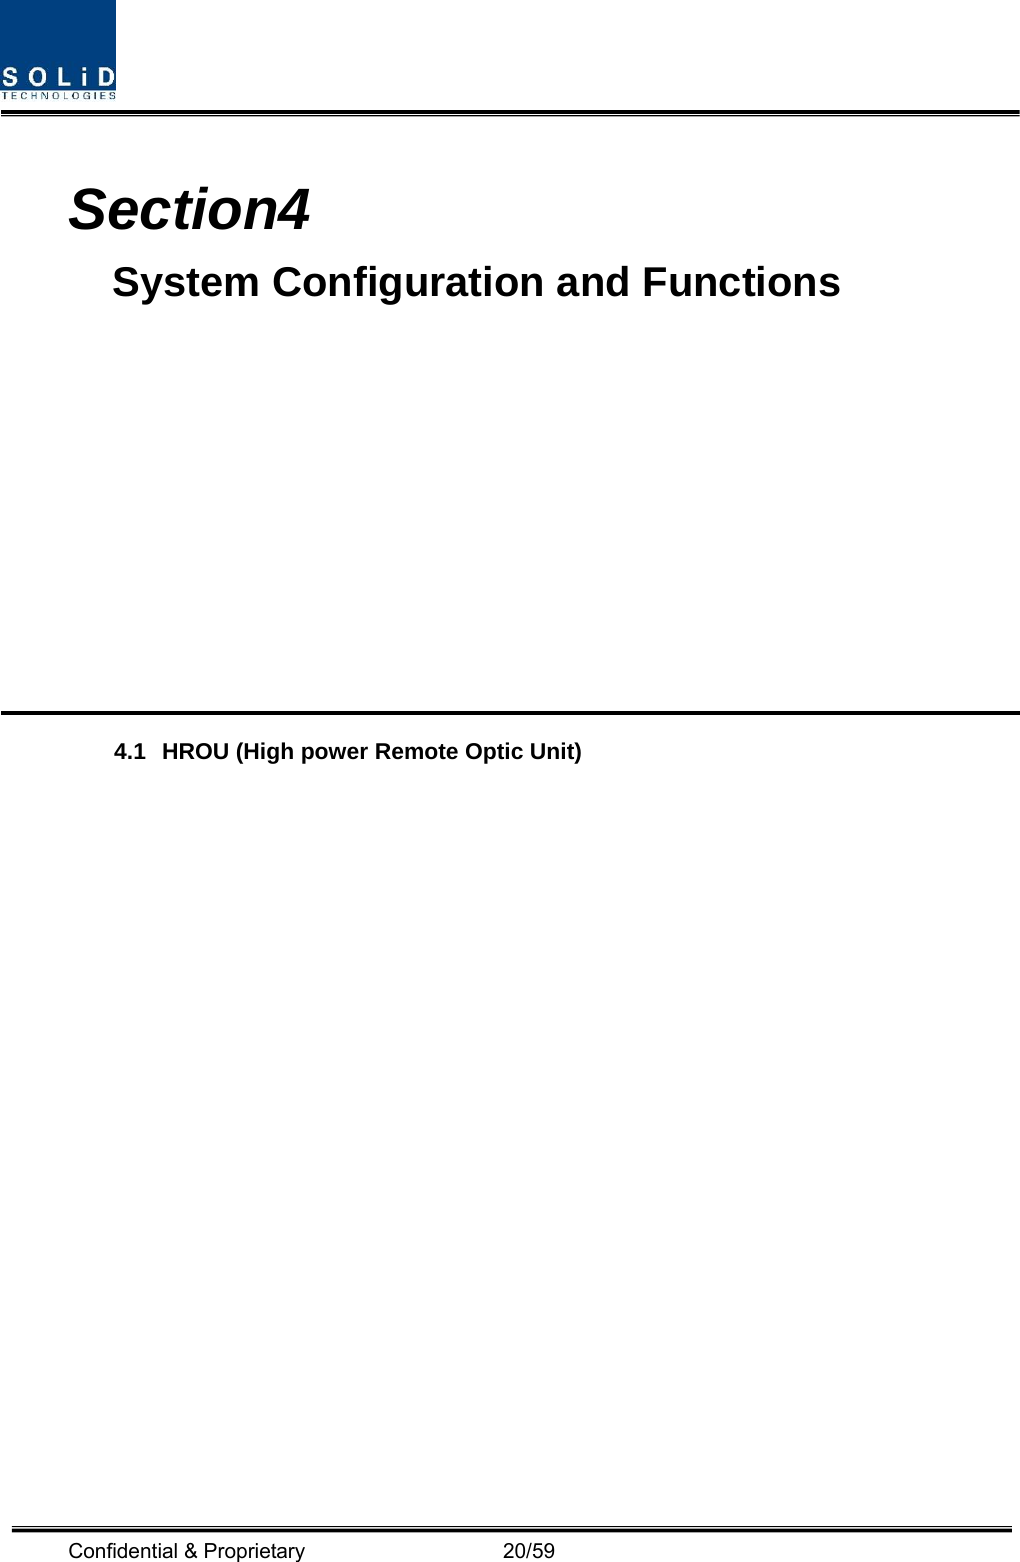  Confidential &amp; Proprietary                   20/59  Section4                               System Configuration and Functions            4.1 HROU (High power Remote Optic Unit)                  